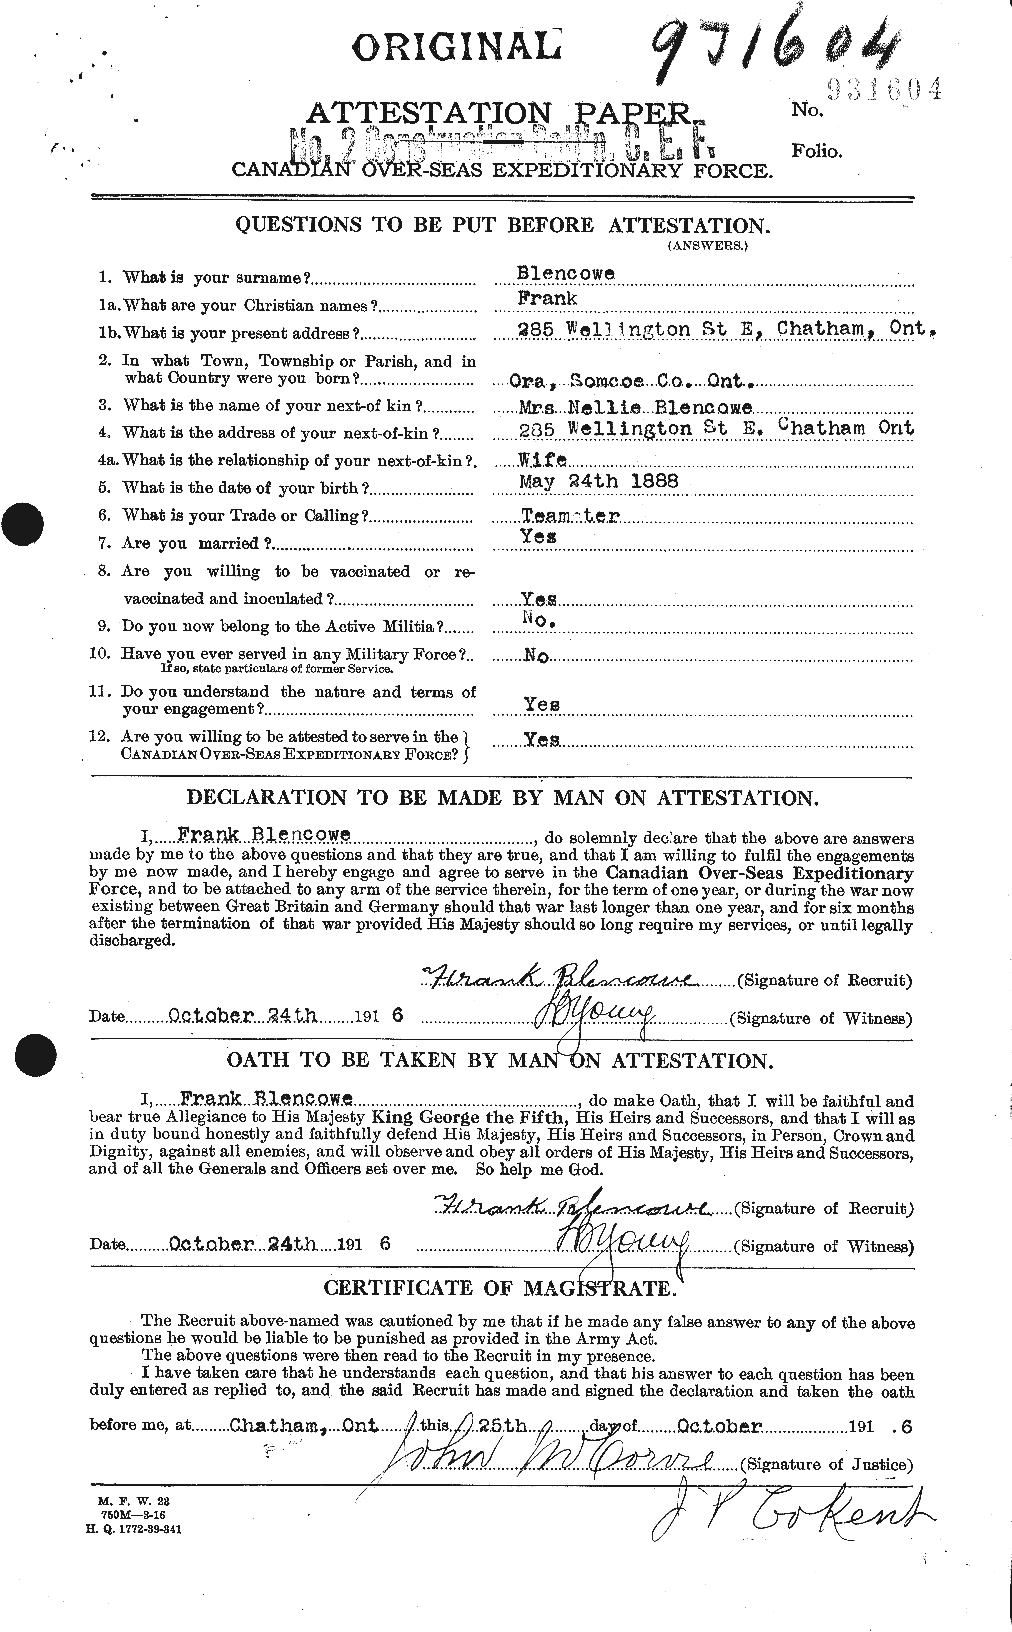 Personnel Records of the First World War - CEF 247956a